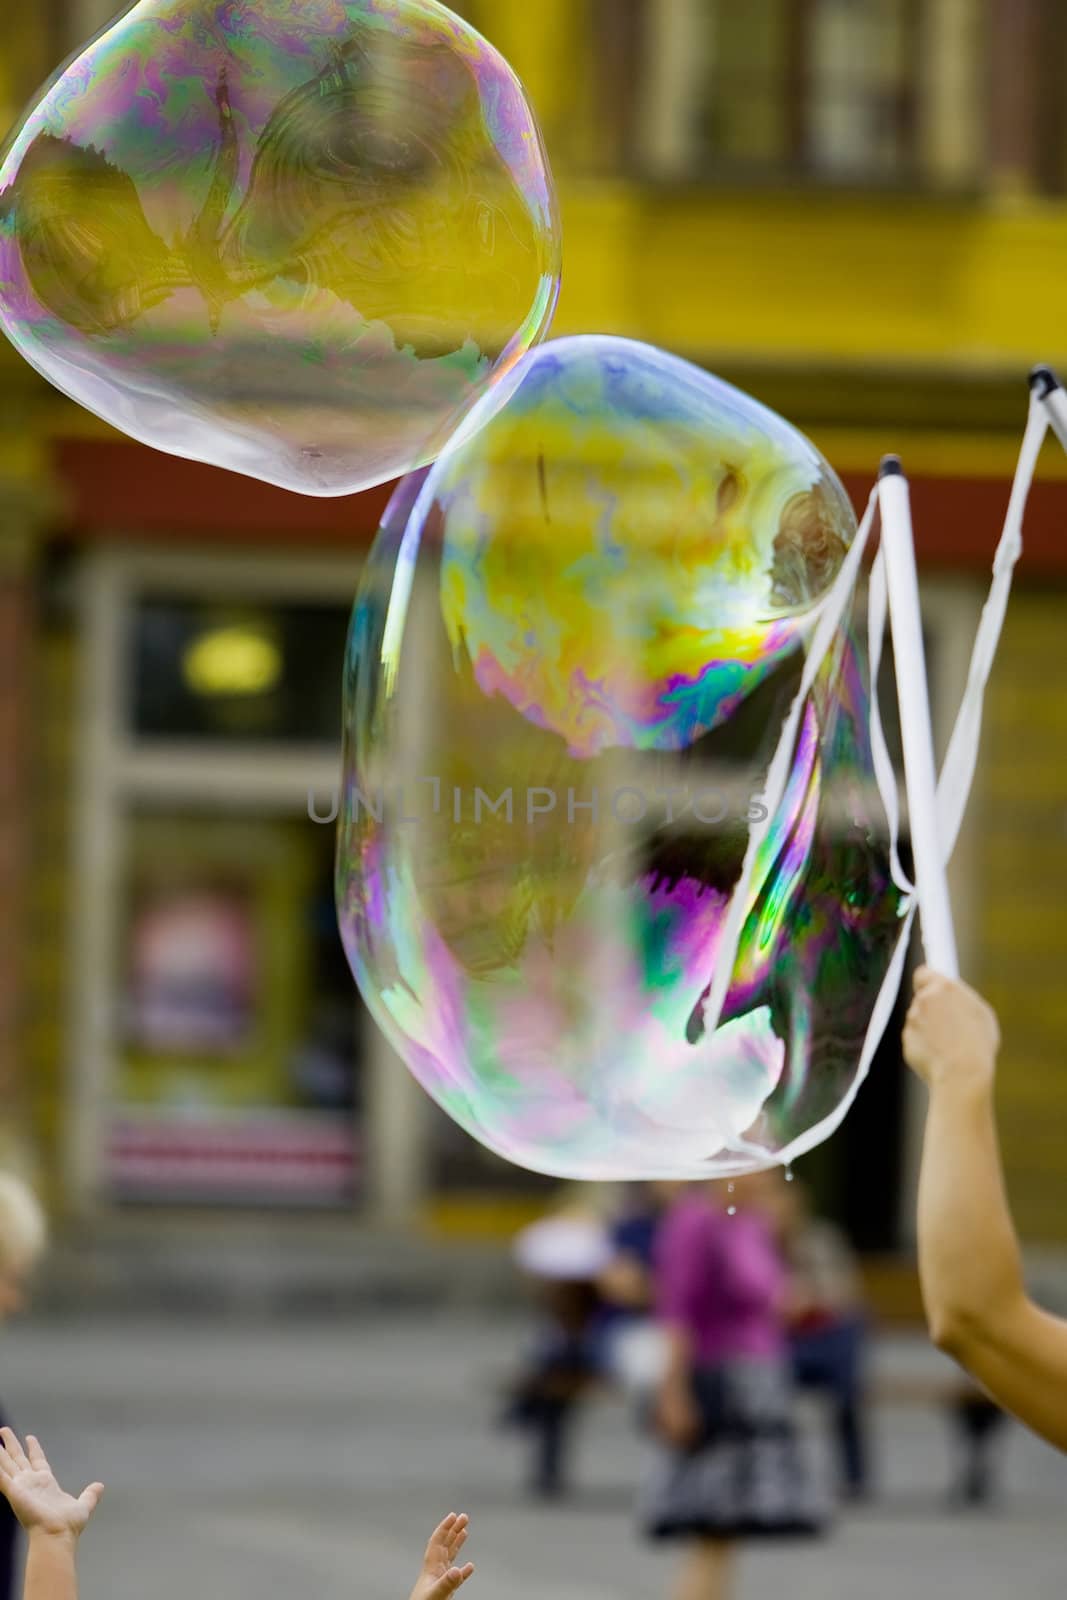  Blowing giant bubbles (street photo)

